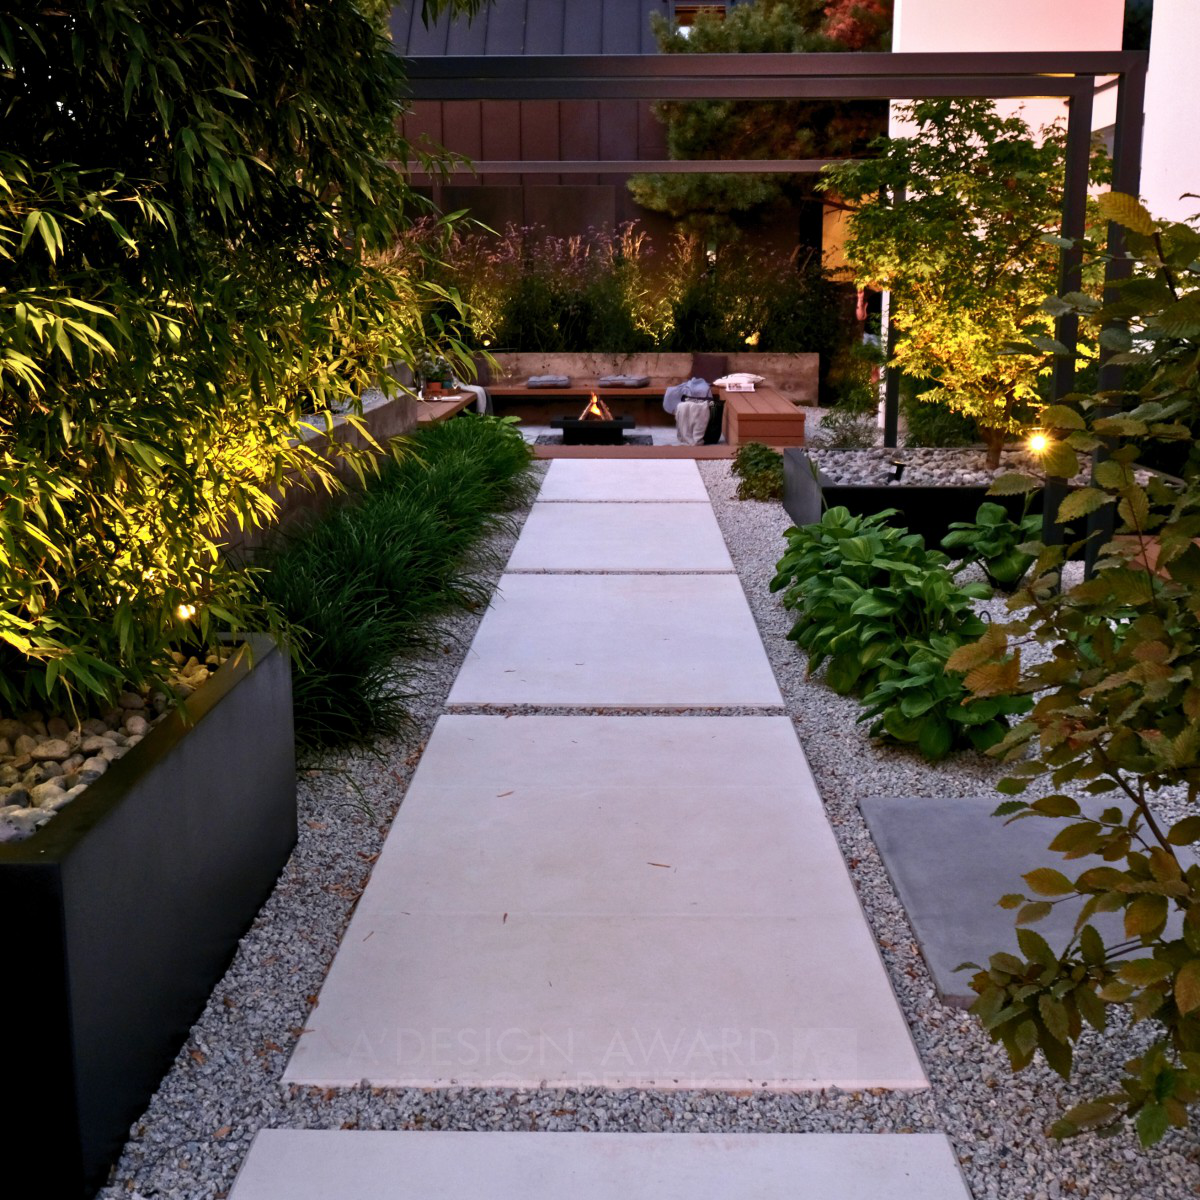 Dagmara Berent wins Iron at the prestigious A' Landscape Planning and Garden Design Award with Simple Chic Home Garden.